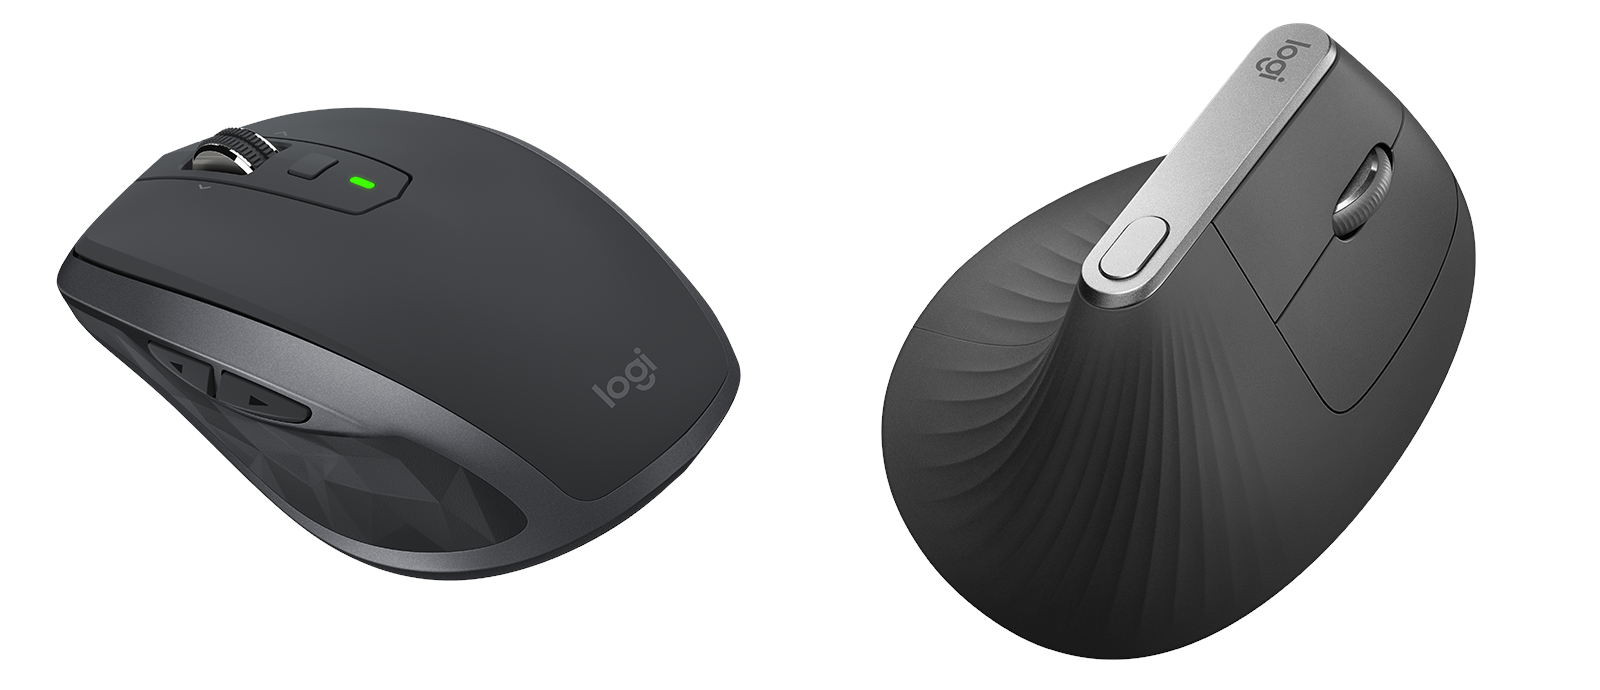 Logitech Vertical and MX Anywhere Mice | ZDNET